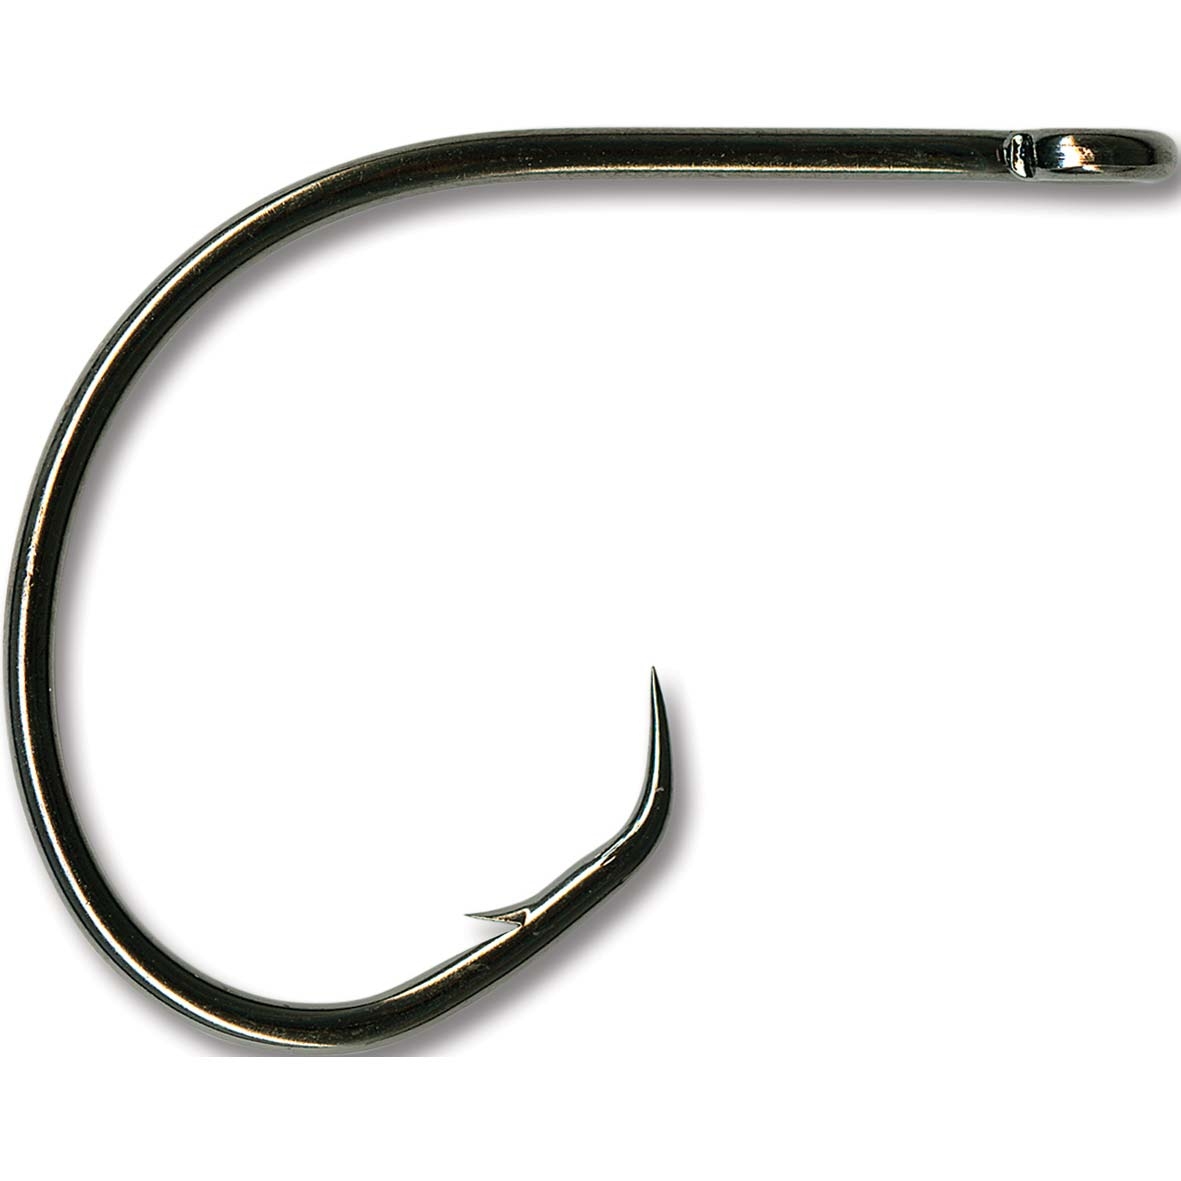 Mustad Demon Perfect Circle Hooks, in-Line